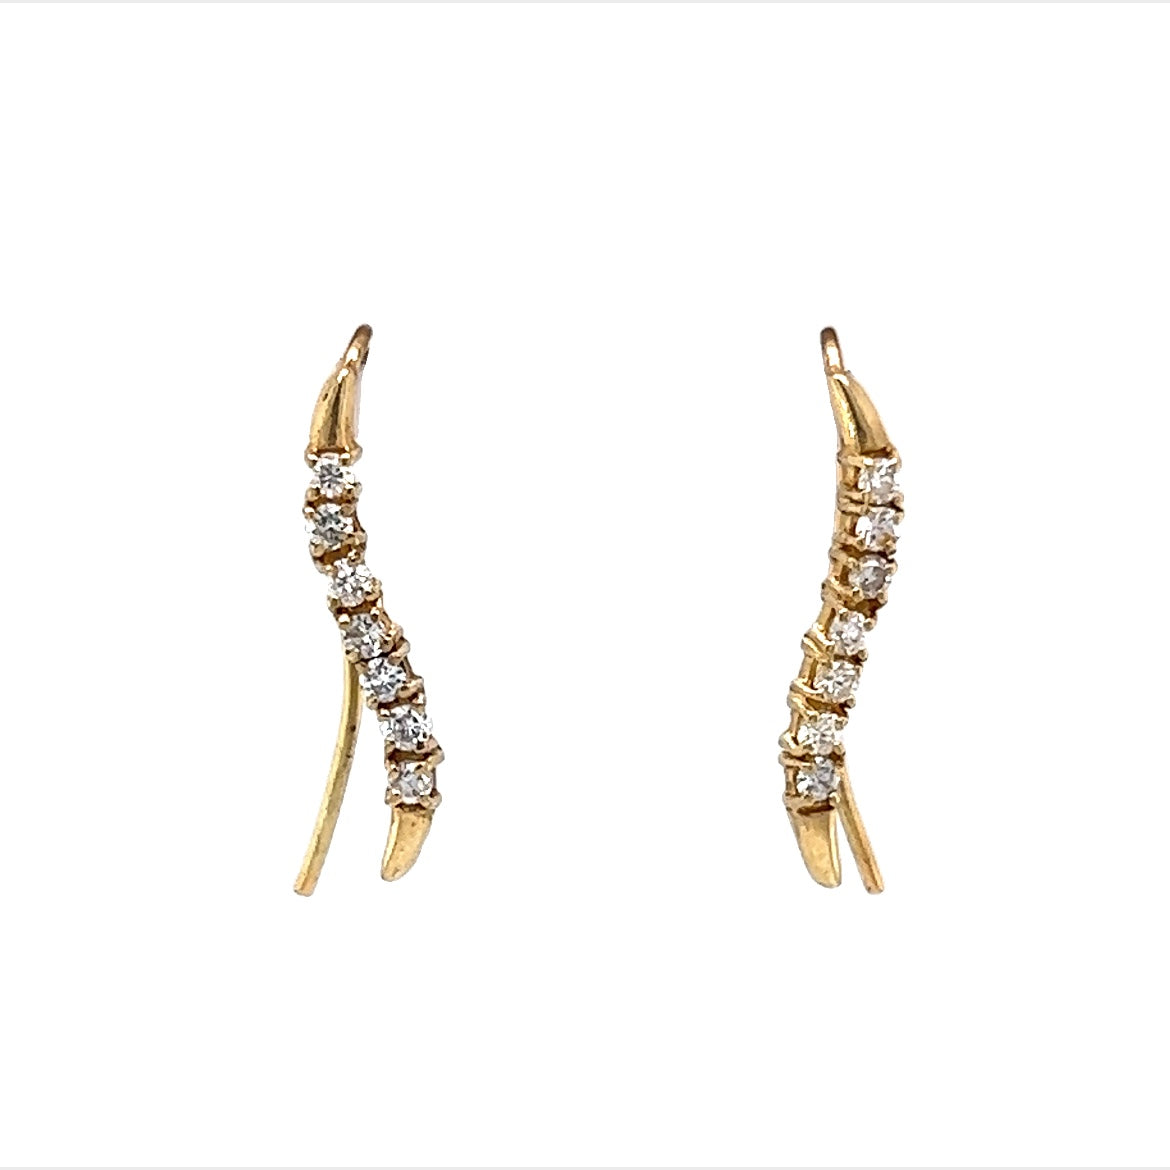 Curved Diamond Bar Drop or Climber Earrings in 14k Yellow Gold